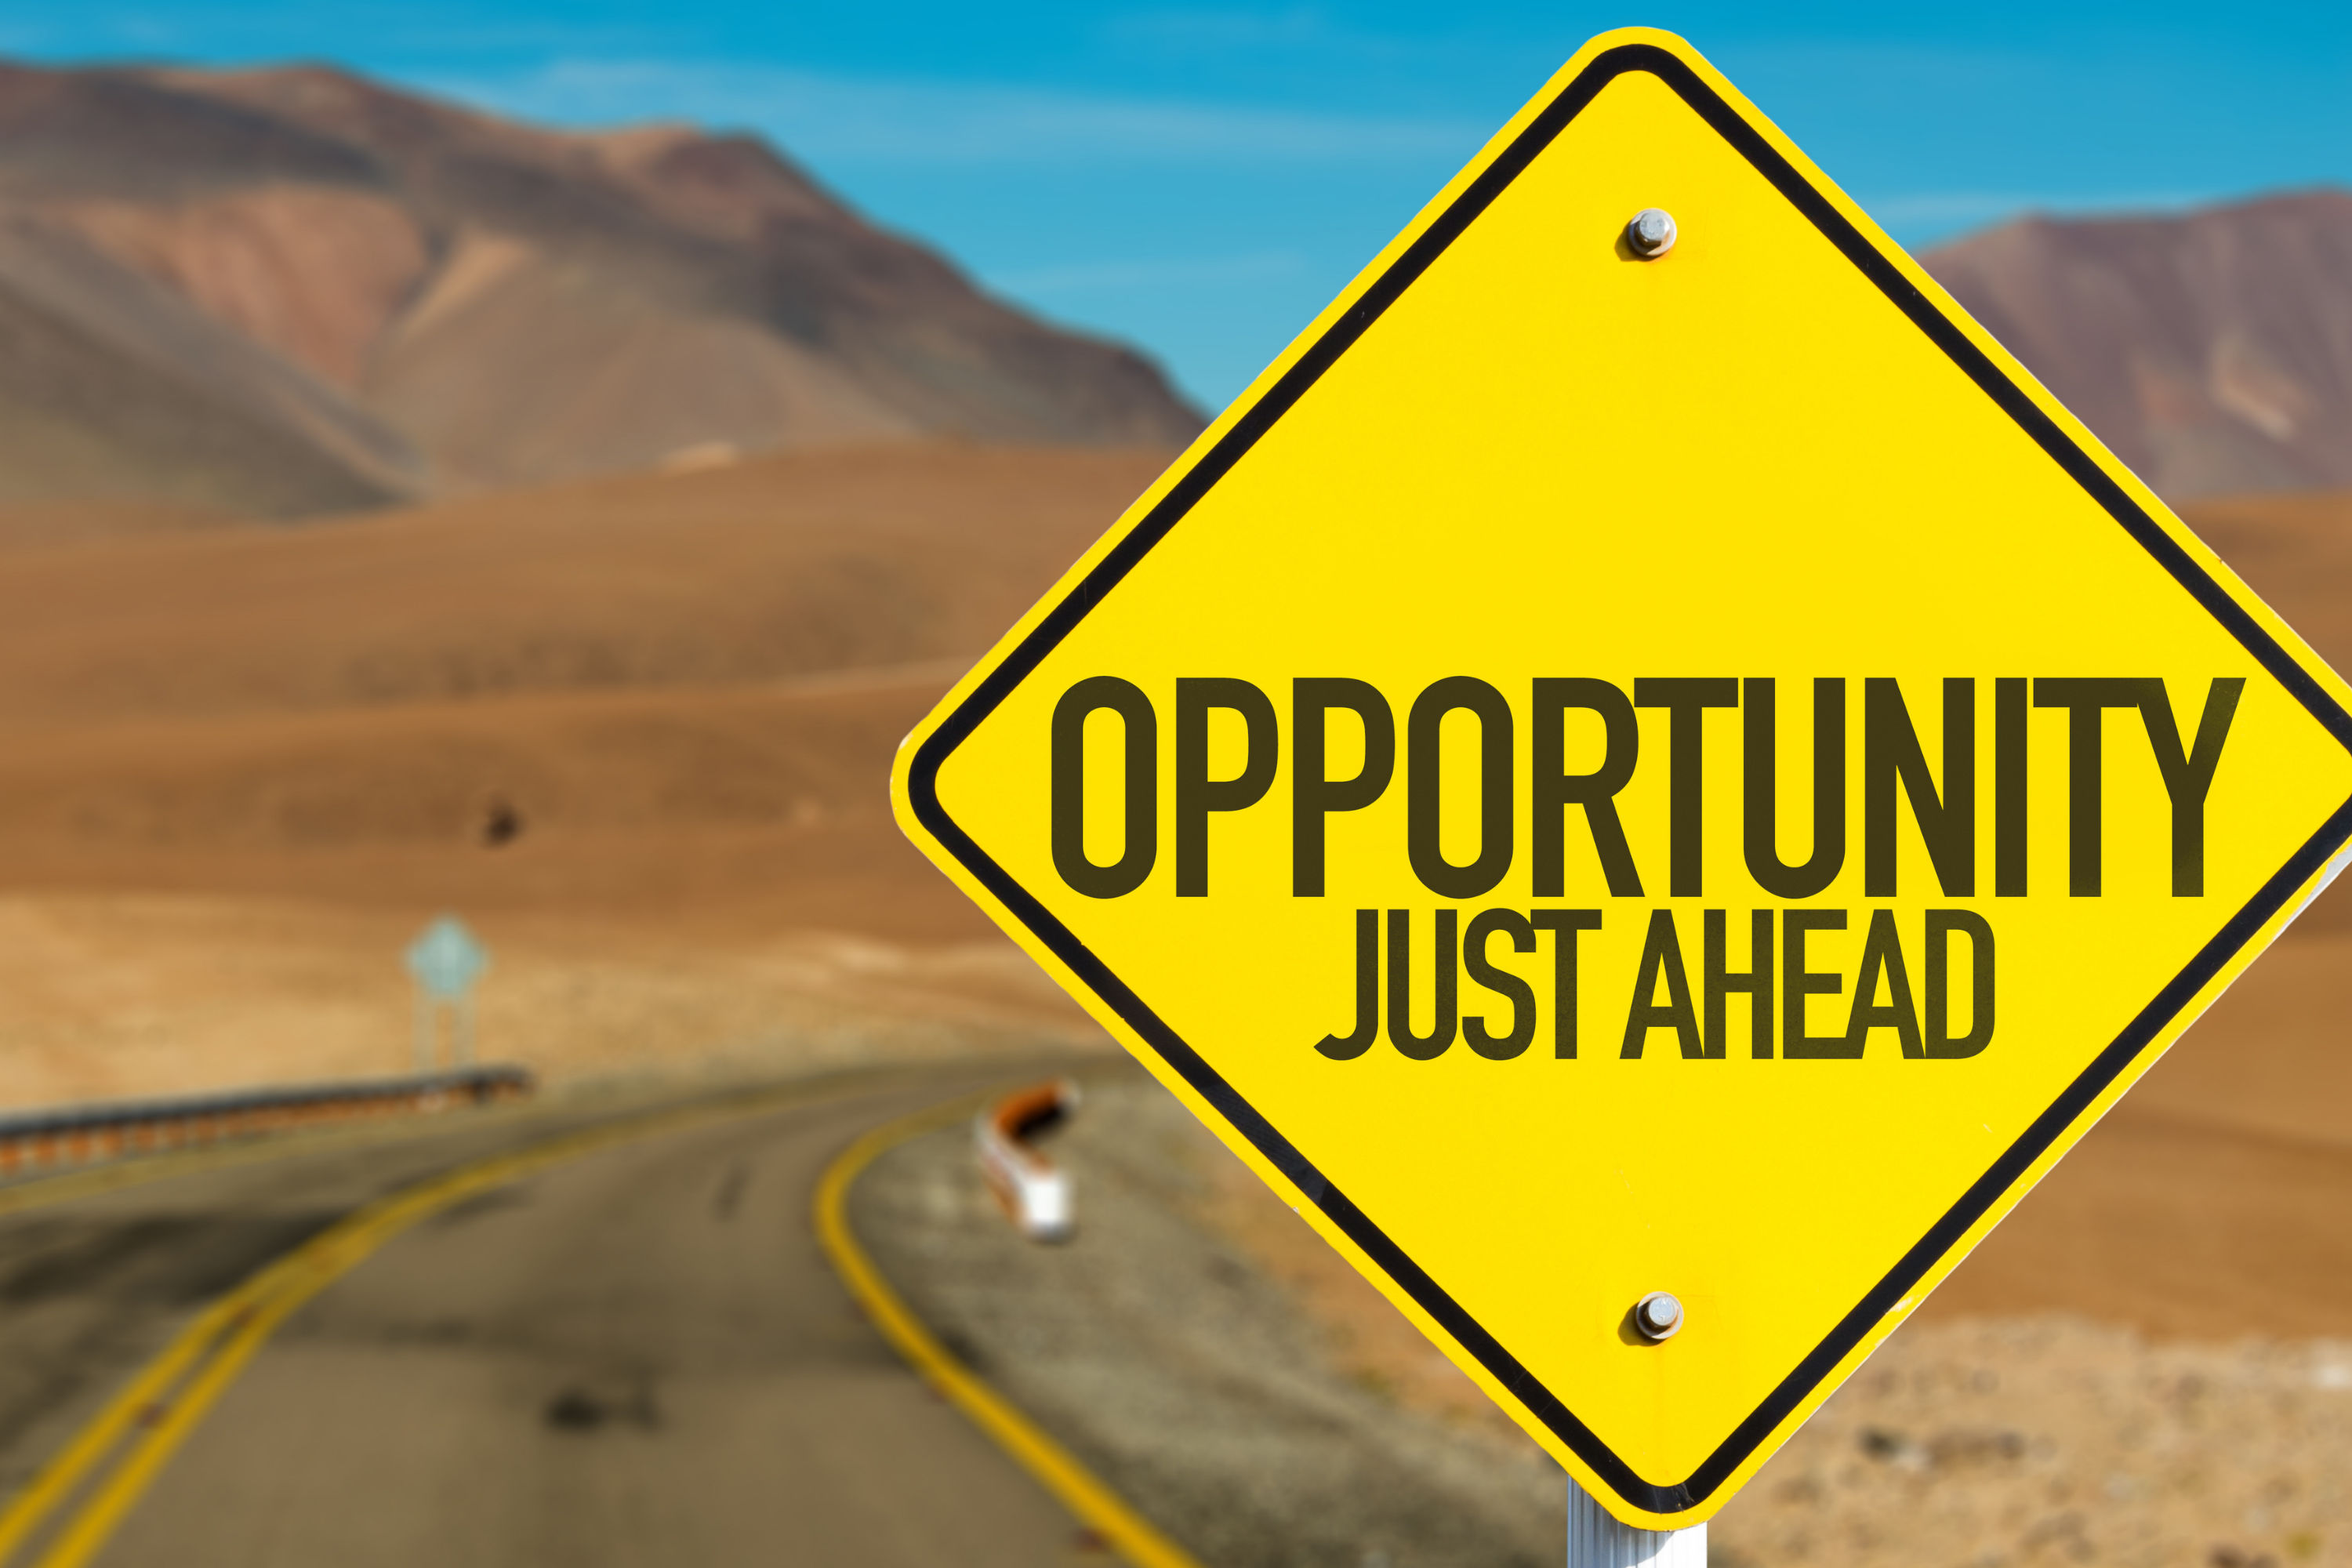 Yellow sign in the forefront reading 'Opportunities Just Ahead' with an open road in the background.